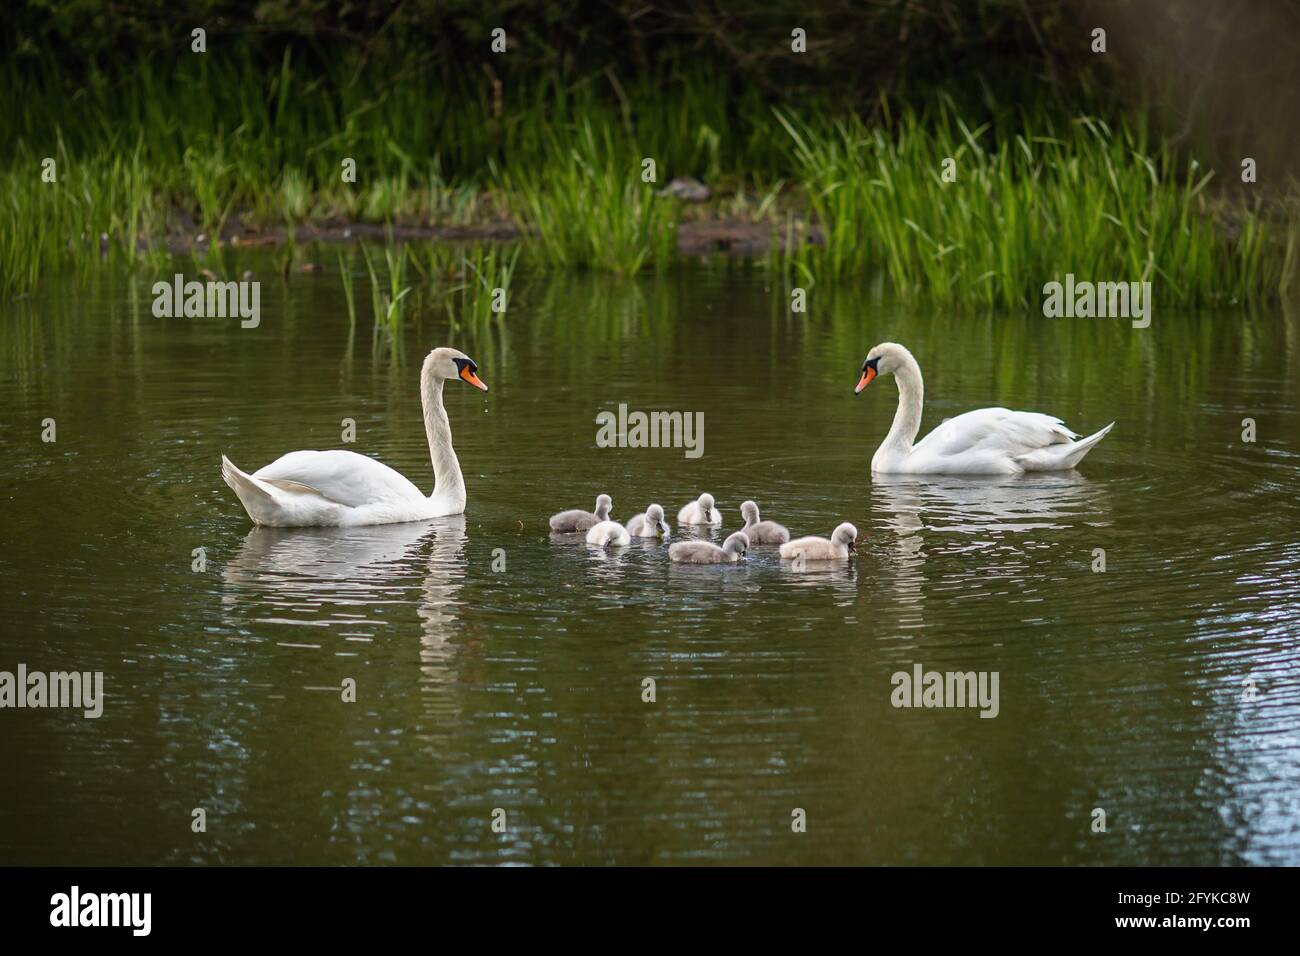 Wild white mute swan family with seven cute little offsprings swimming in green lake. Stock Photo